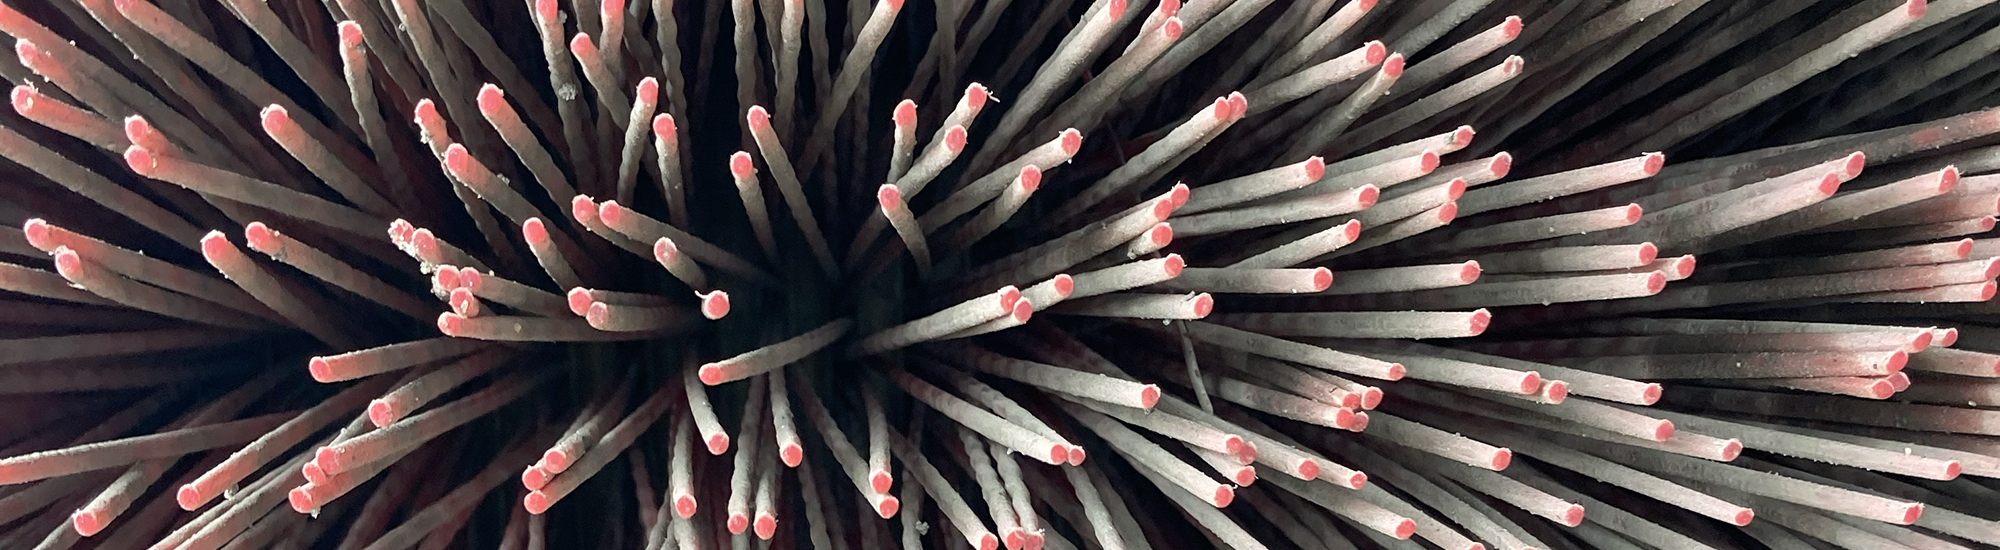 Bristles on a street sweeping truck.